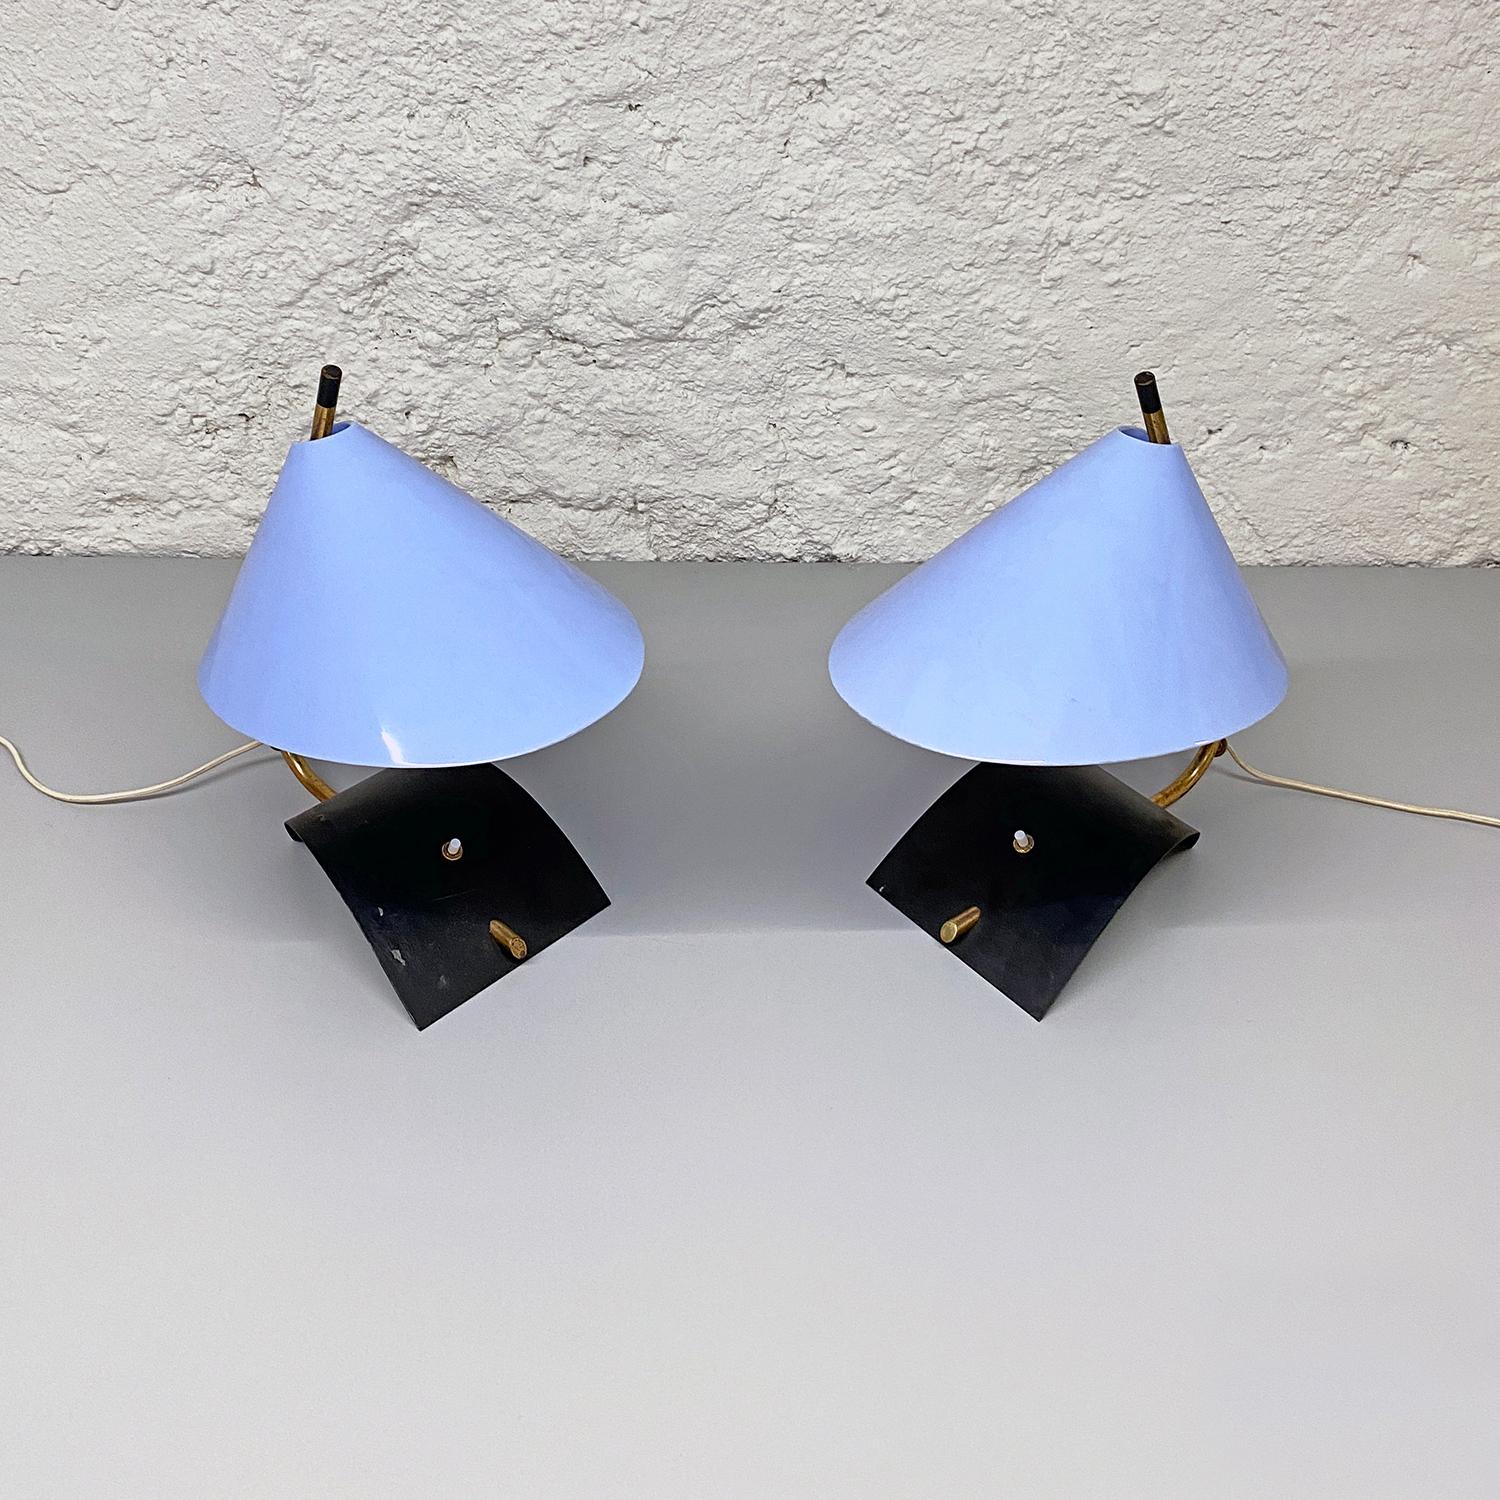 Italian Mid-Century Brass Table Lamps with Blue Lampshade by Stilnovo, 1950s 1